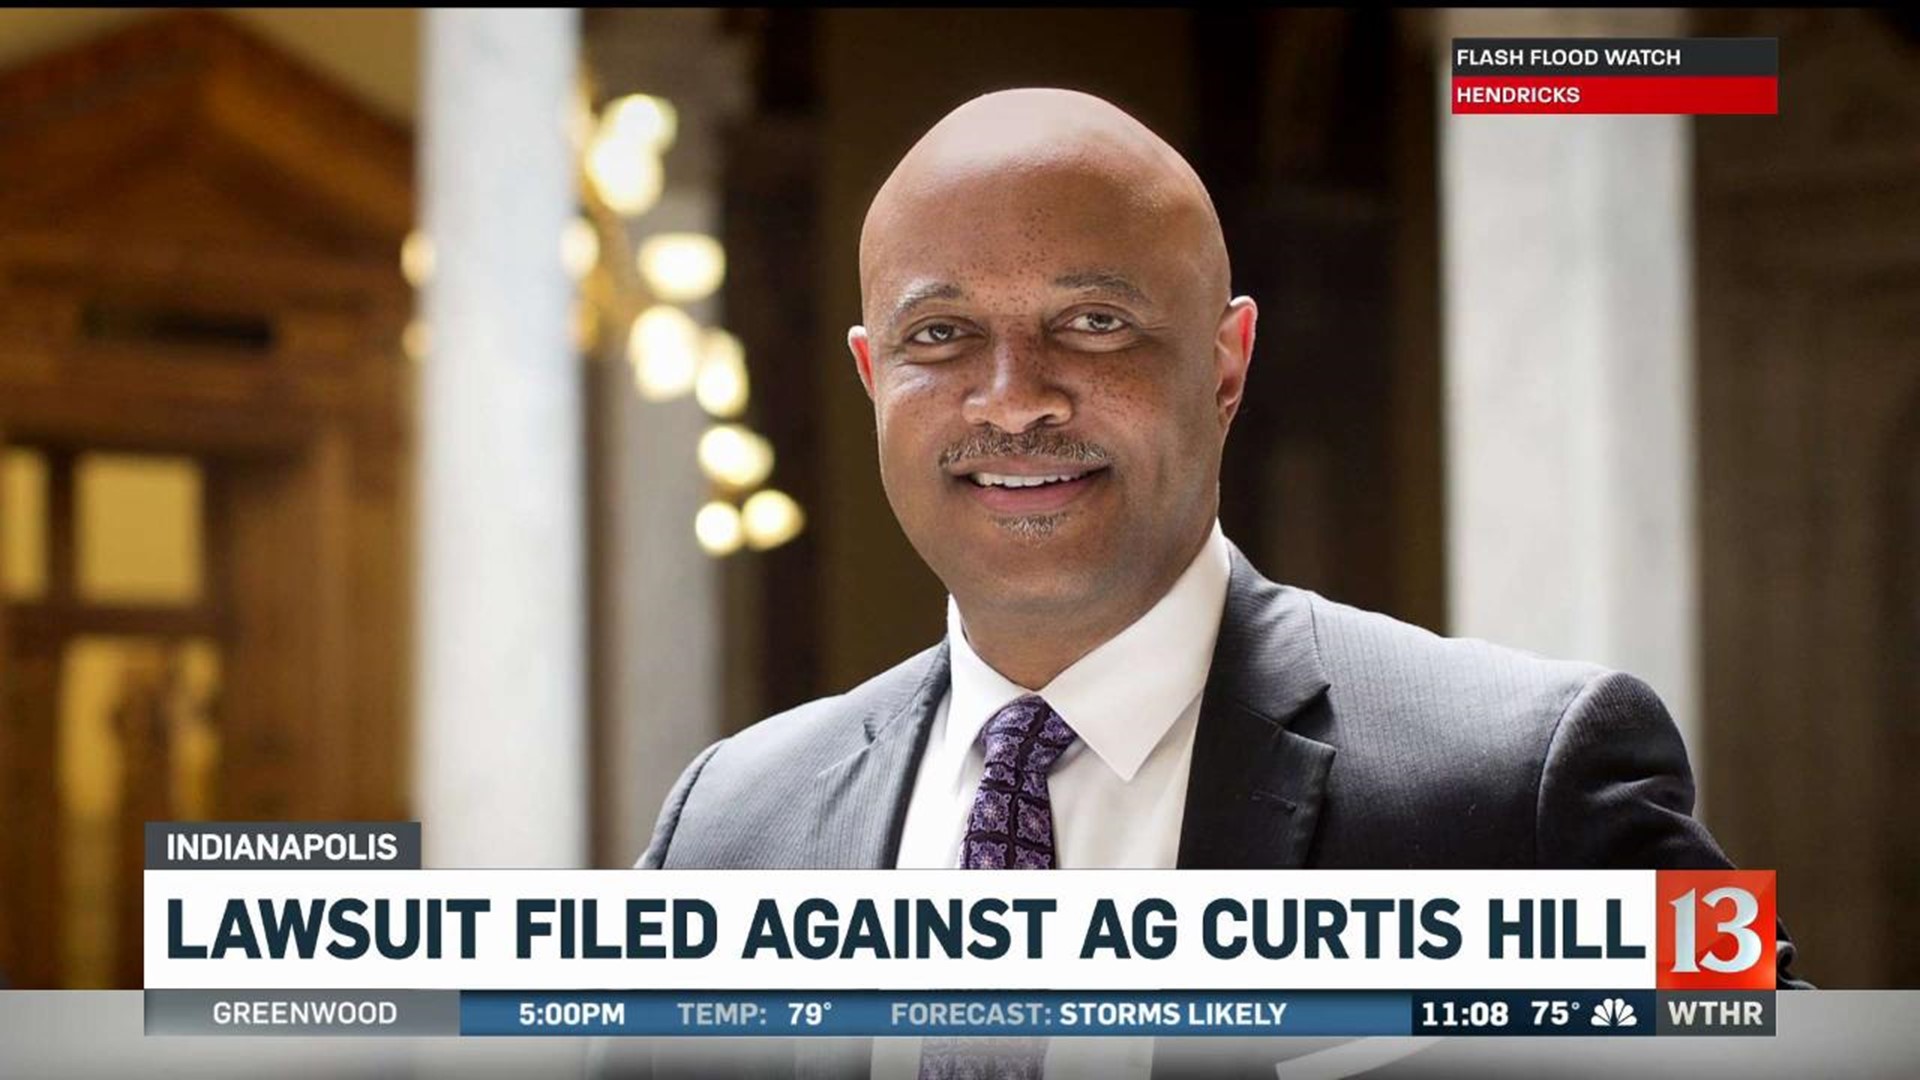 Lawsuit filed against AG Curtis Hill